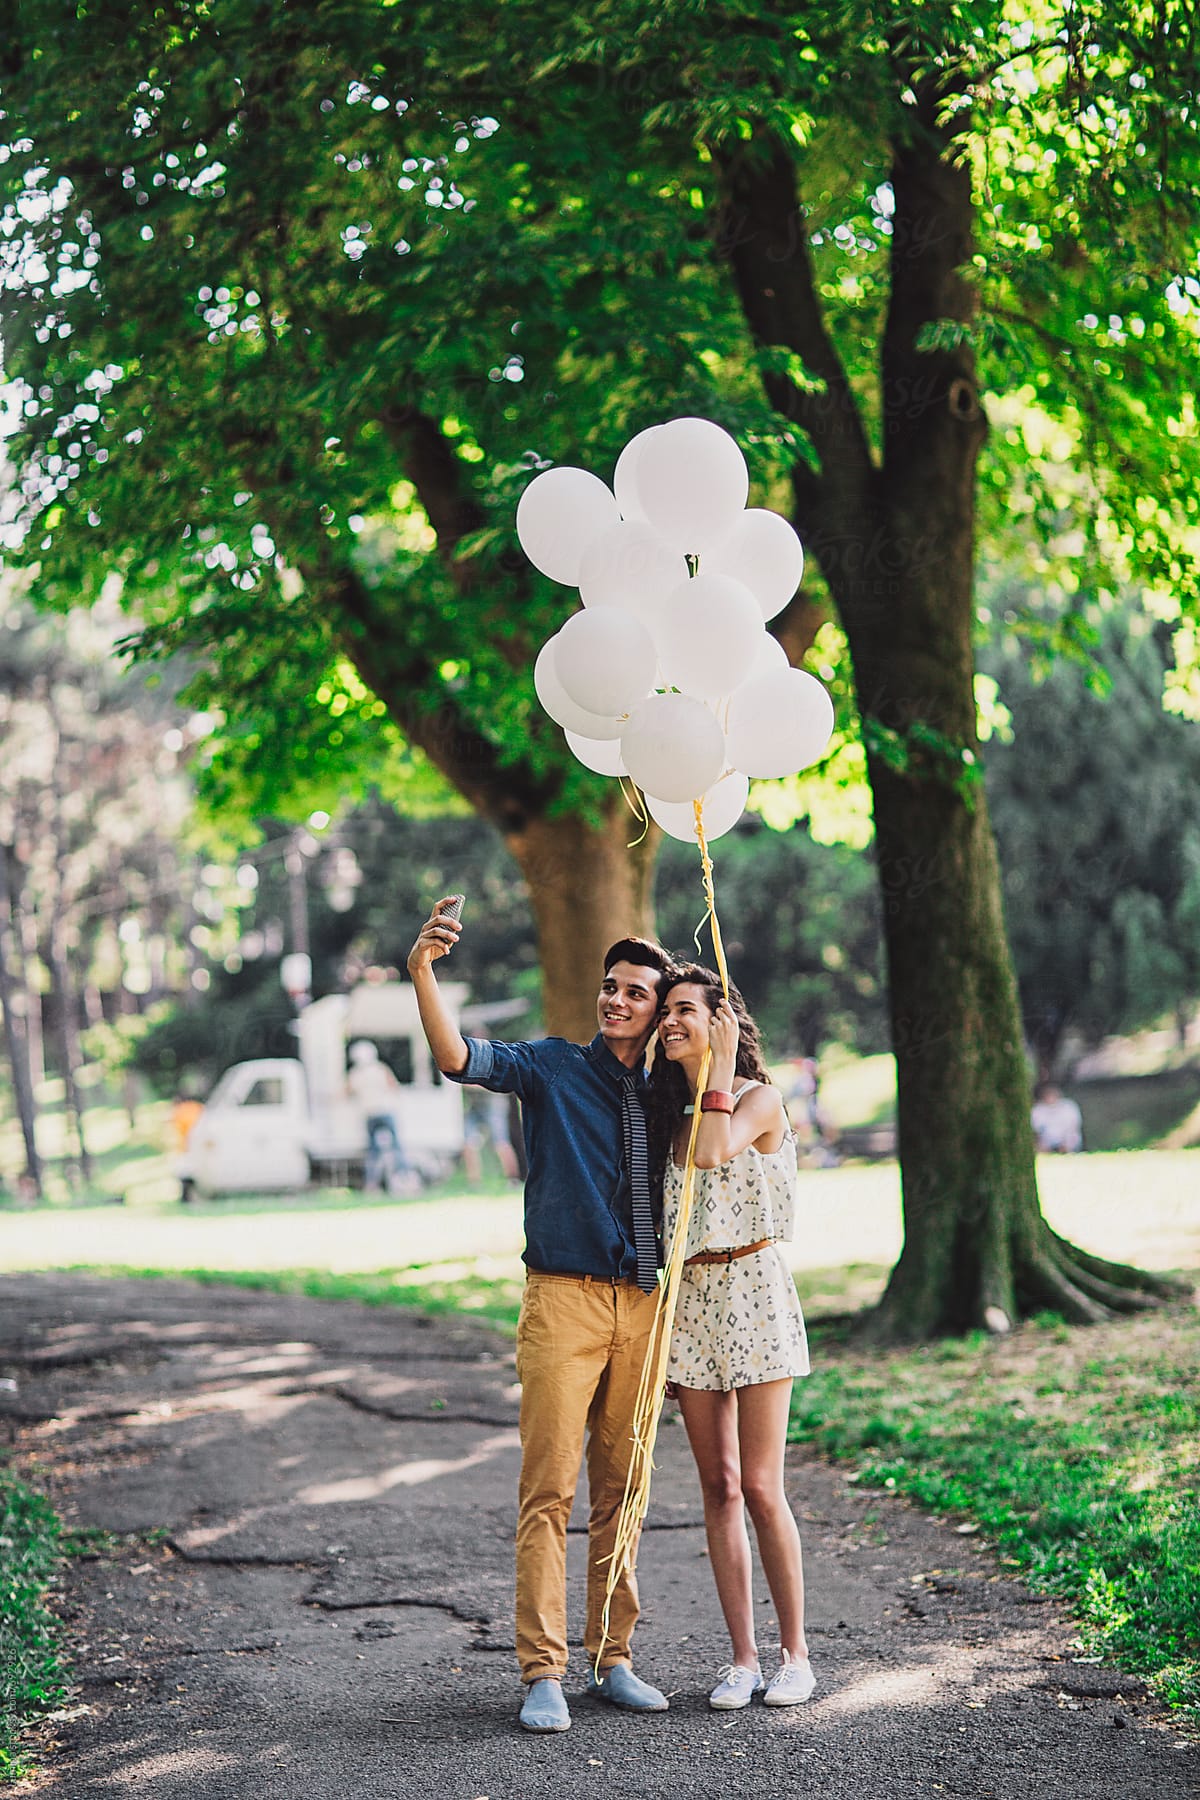 Couple With Balloons Takes a Selfie